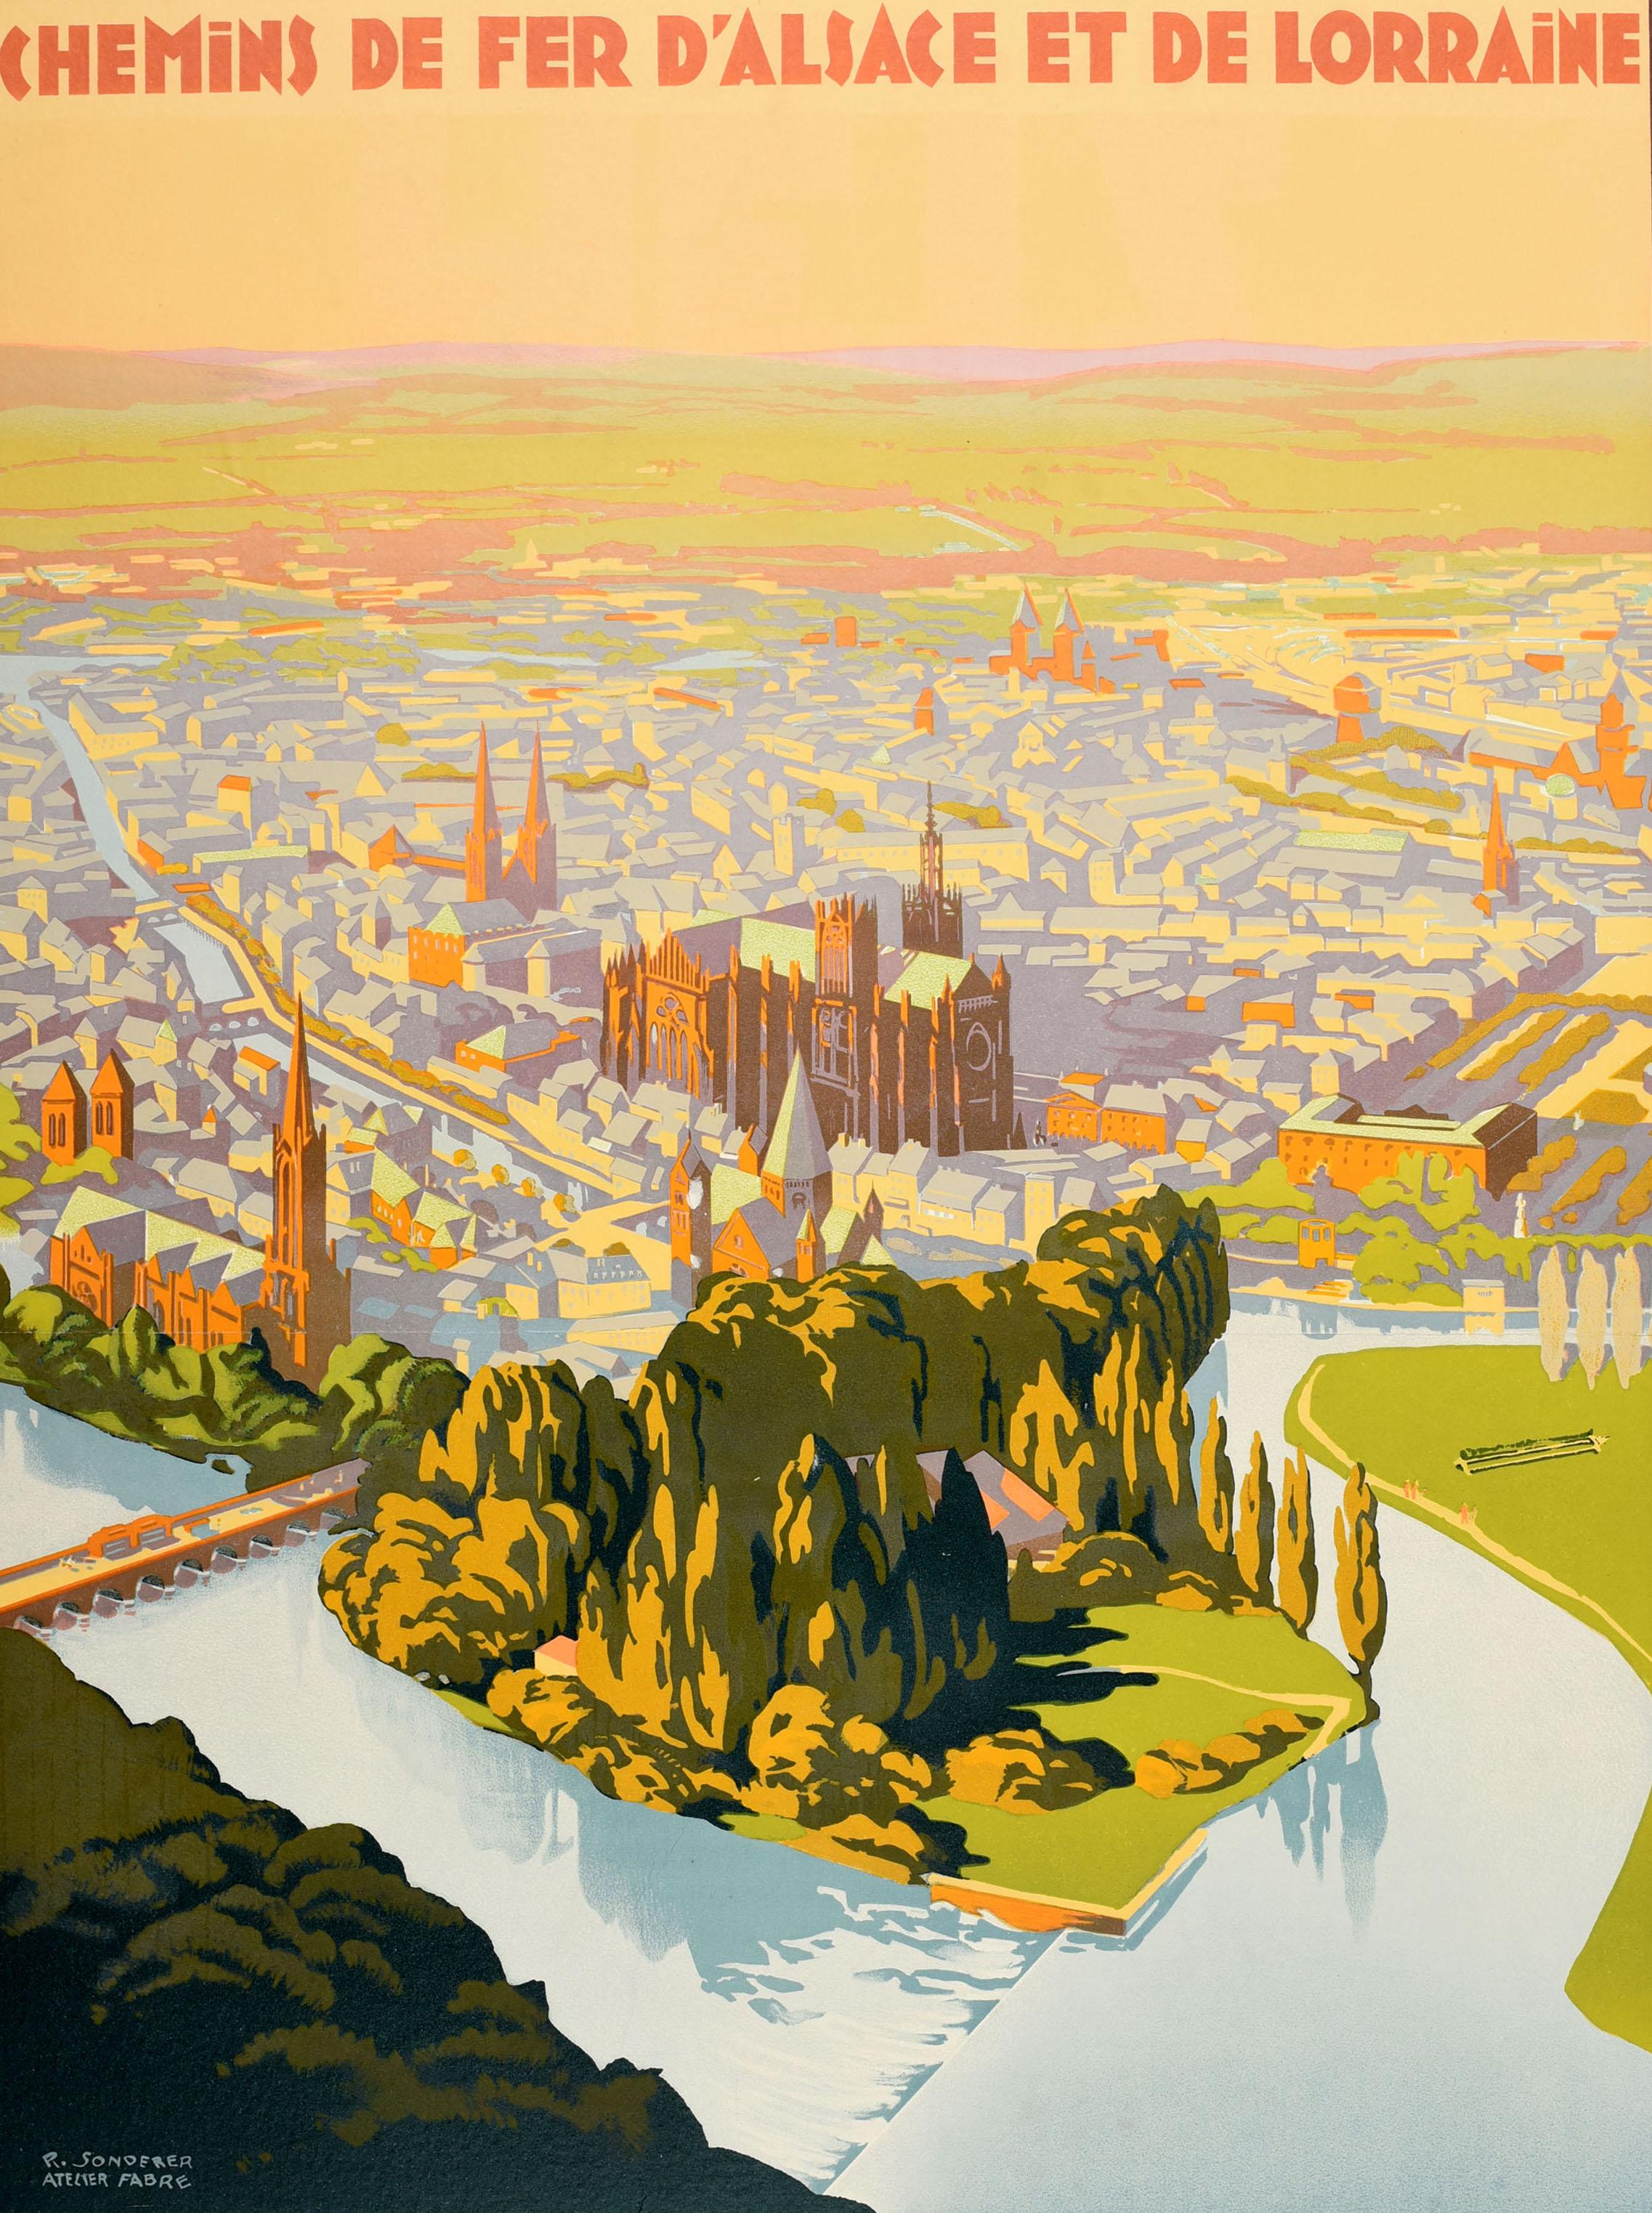 Original vintage French railway travel poster for Metz Historic City - Chemins de Fer d'Alsace et de Lorraine Ville Historique 9 featuring a stunning view over the ancient city with trees and various old buildings including church spires and the